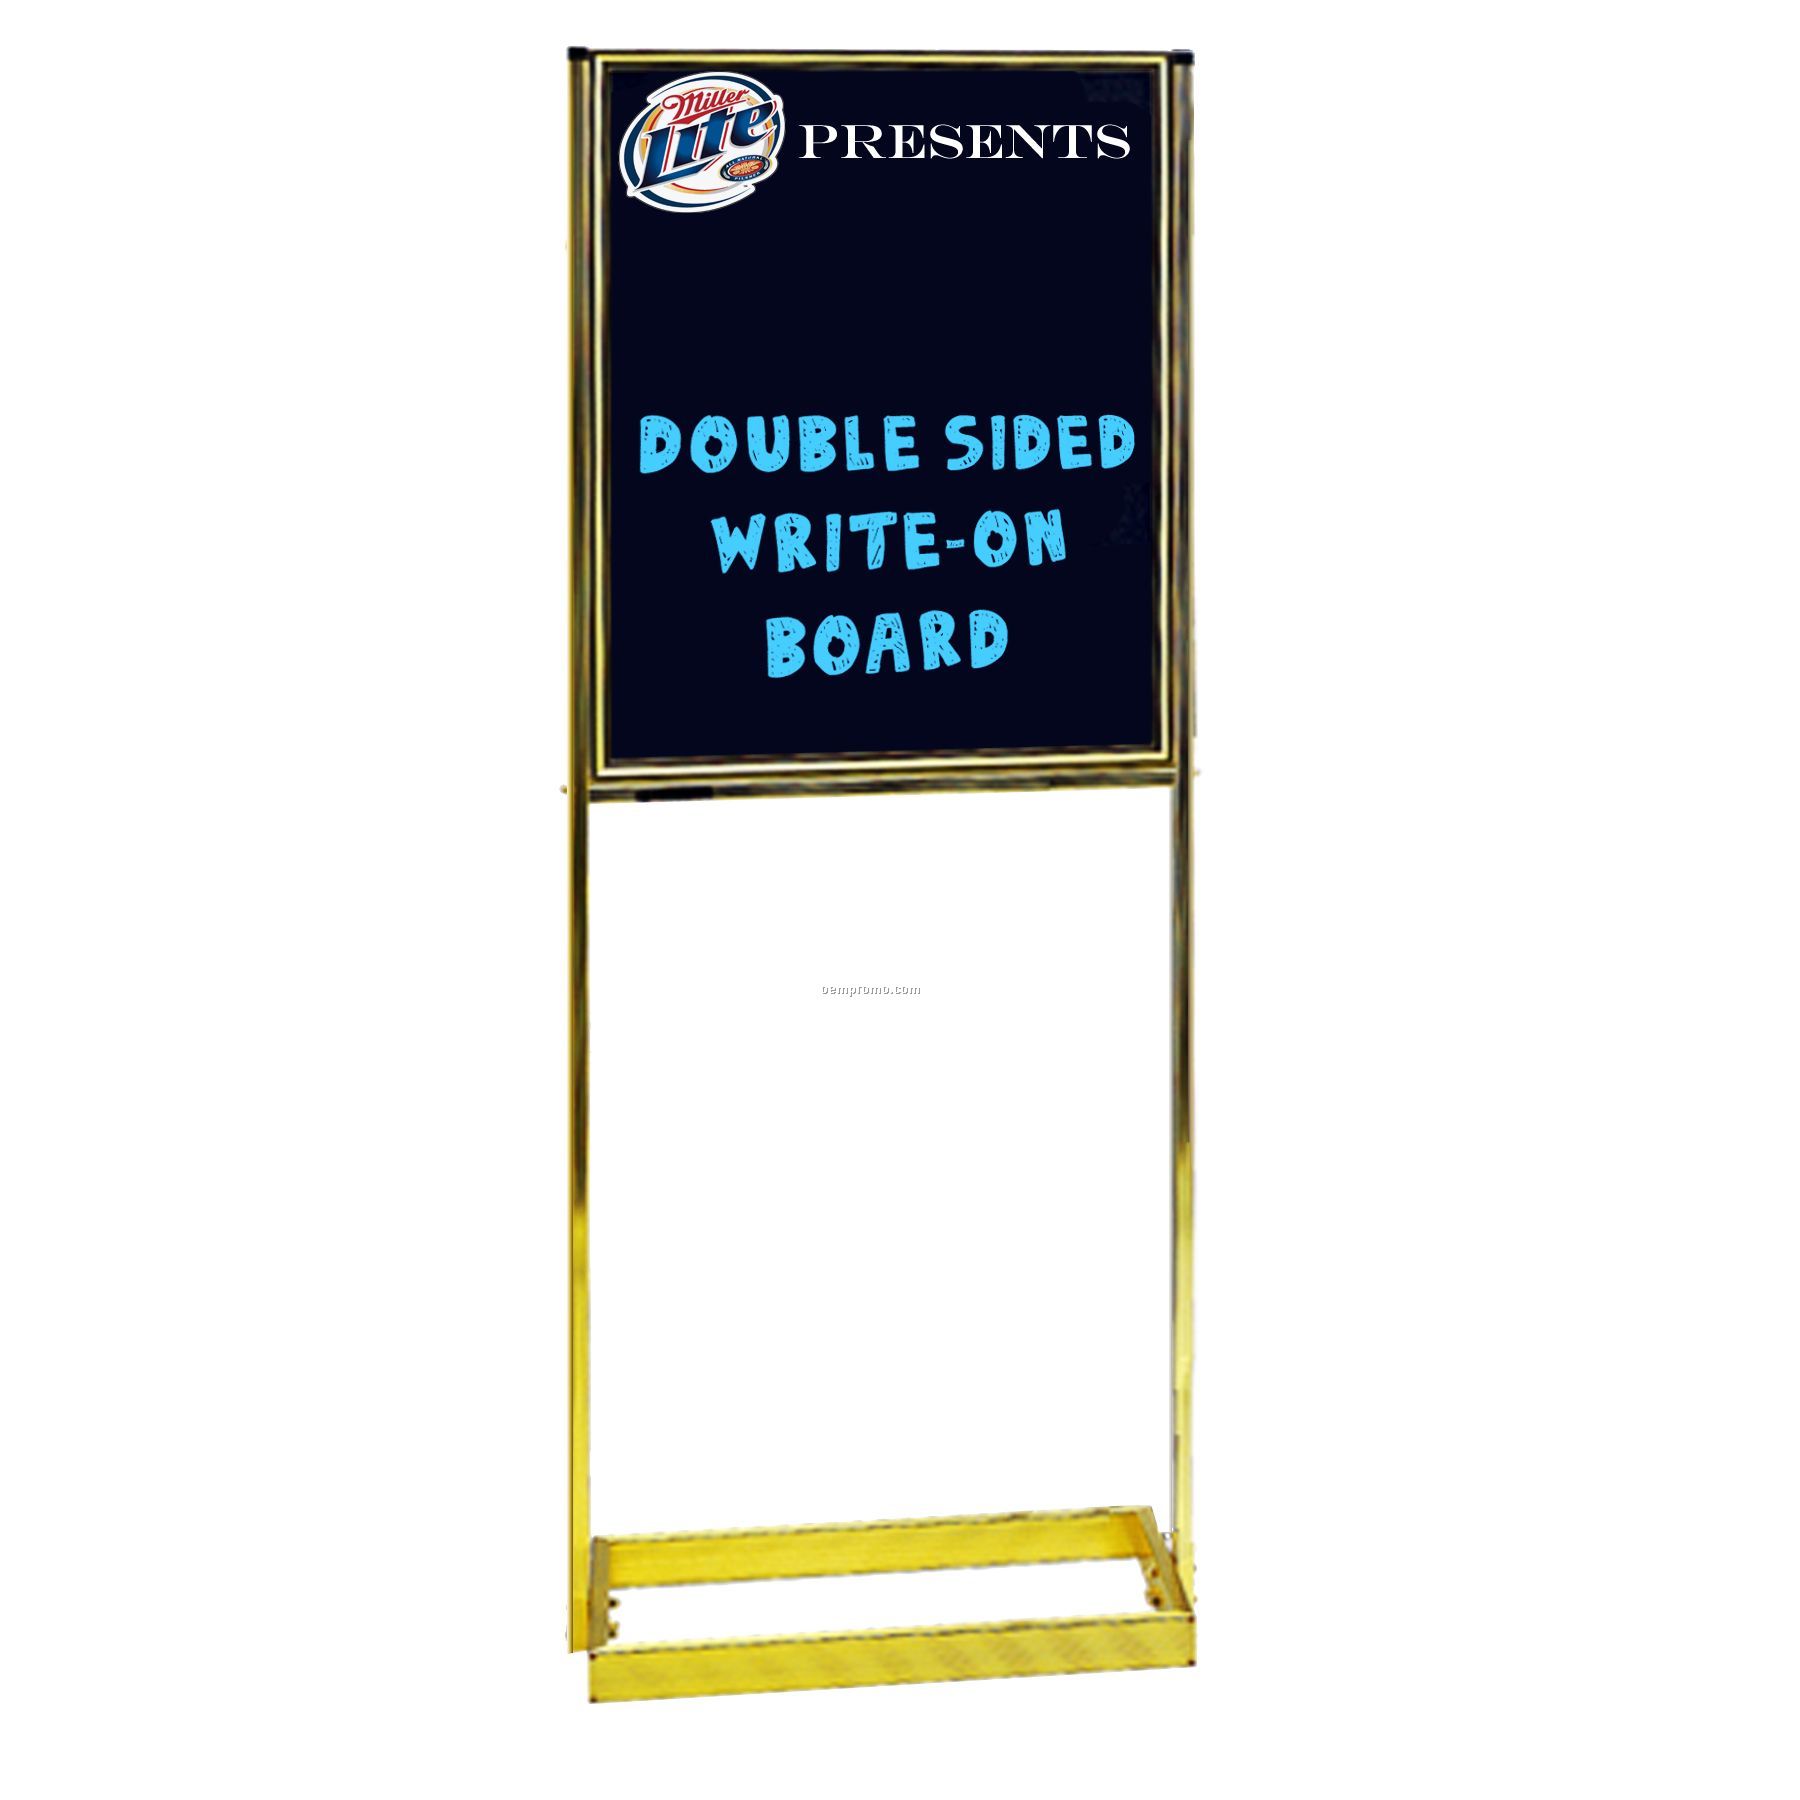 Double Faced Write-on Board W/ Brass Floor Stand (25